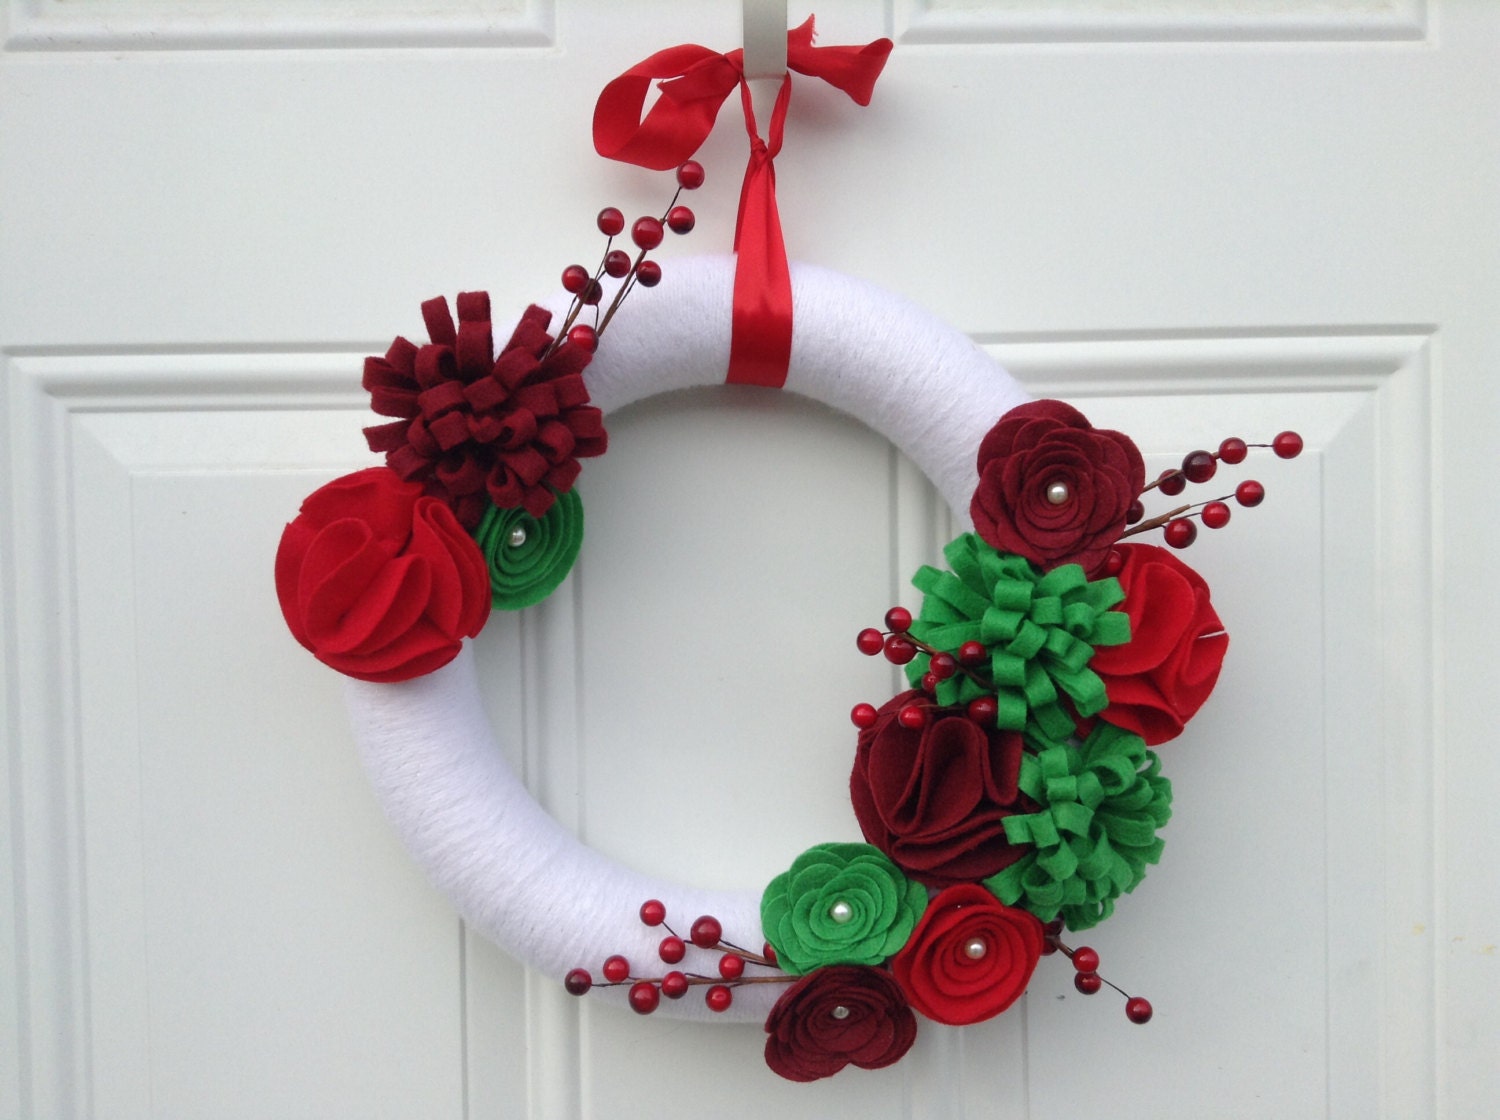 Christmas Wreath, Yarn Wreath, red, white and green Felt Flowers, Floral Wreath, Winter Wreath, holiday Wreath 12 inches - AnitaRexDesigns